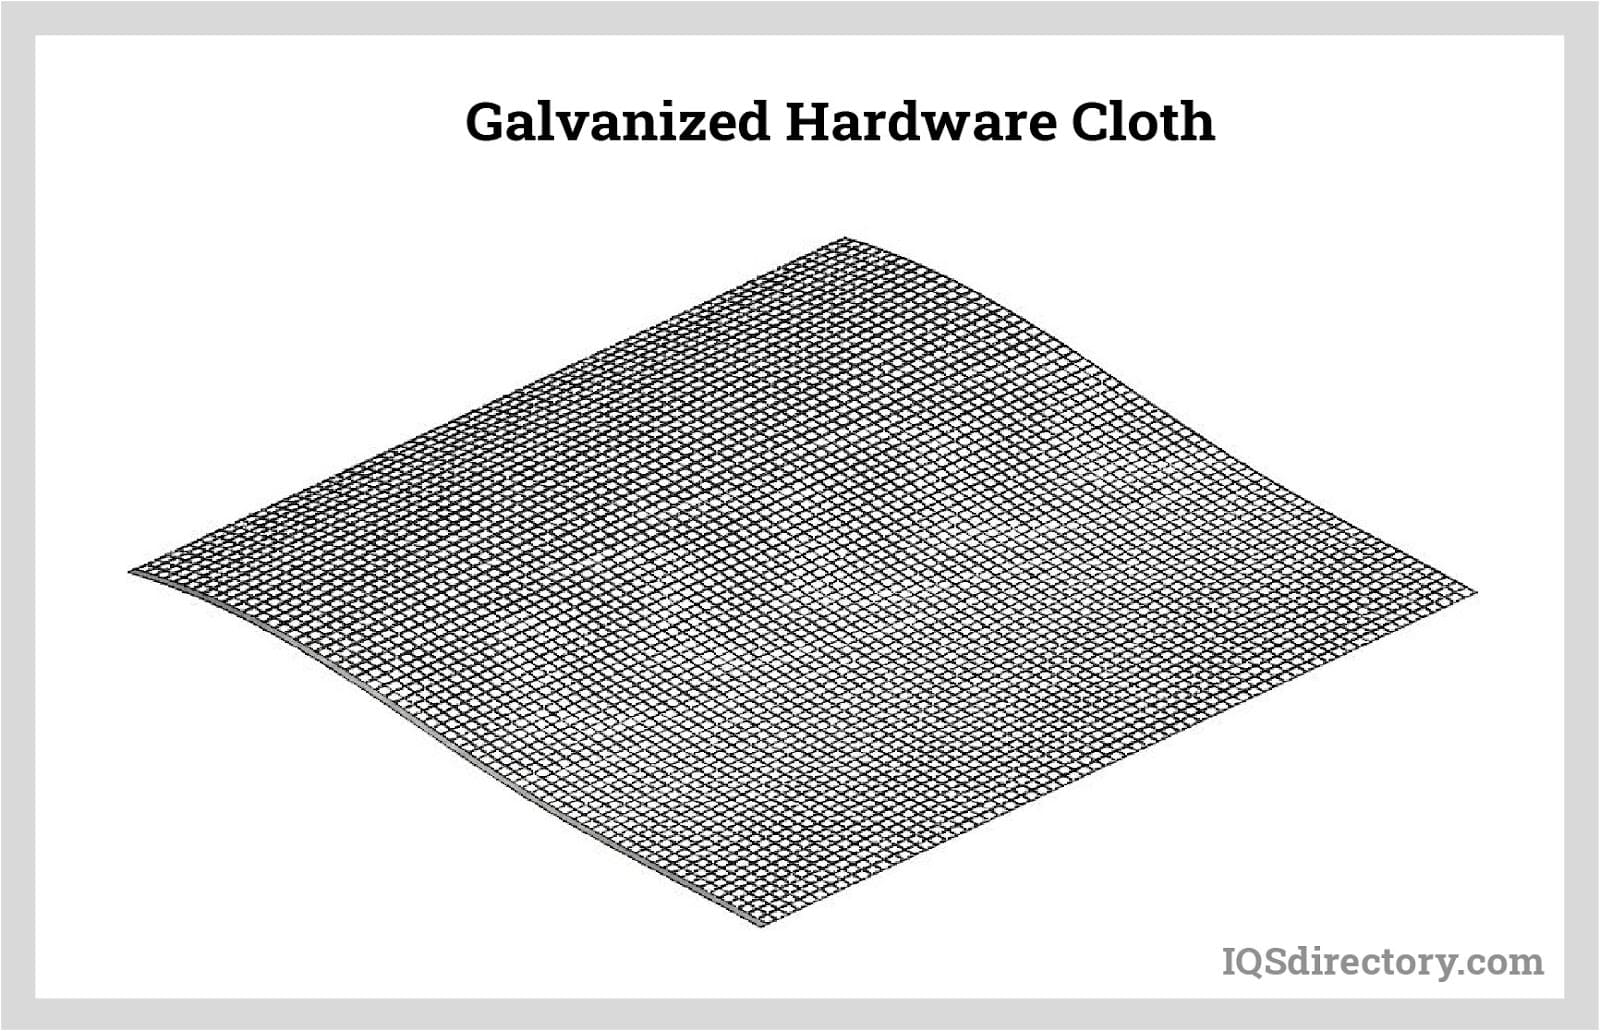 What Is the Difference Between Hardware Cloth and Welded Wire Mesh?